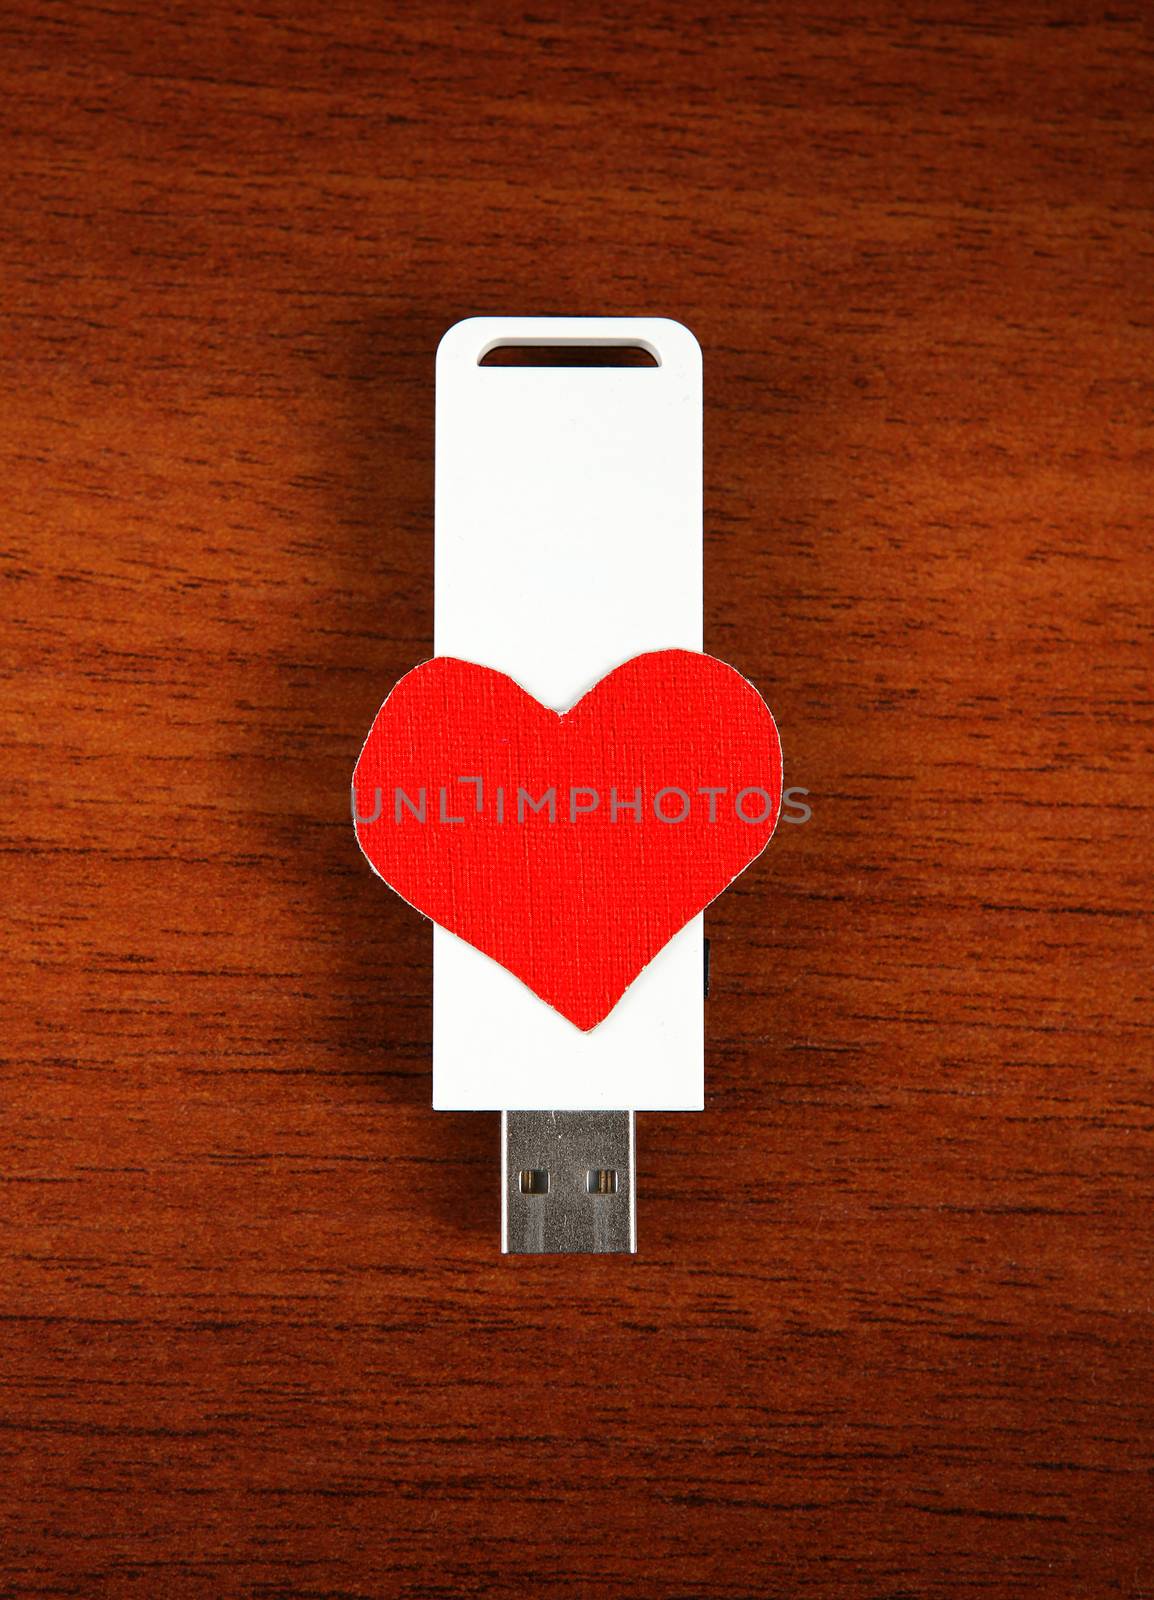 USB Flash Drive with Heart Shape on the Wooden Background